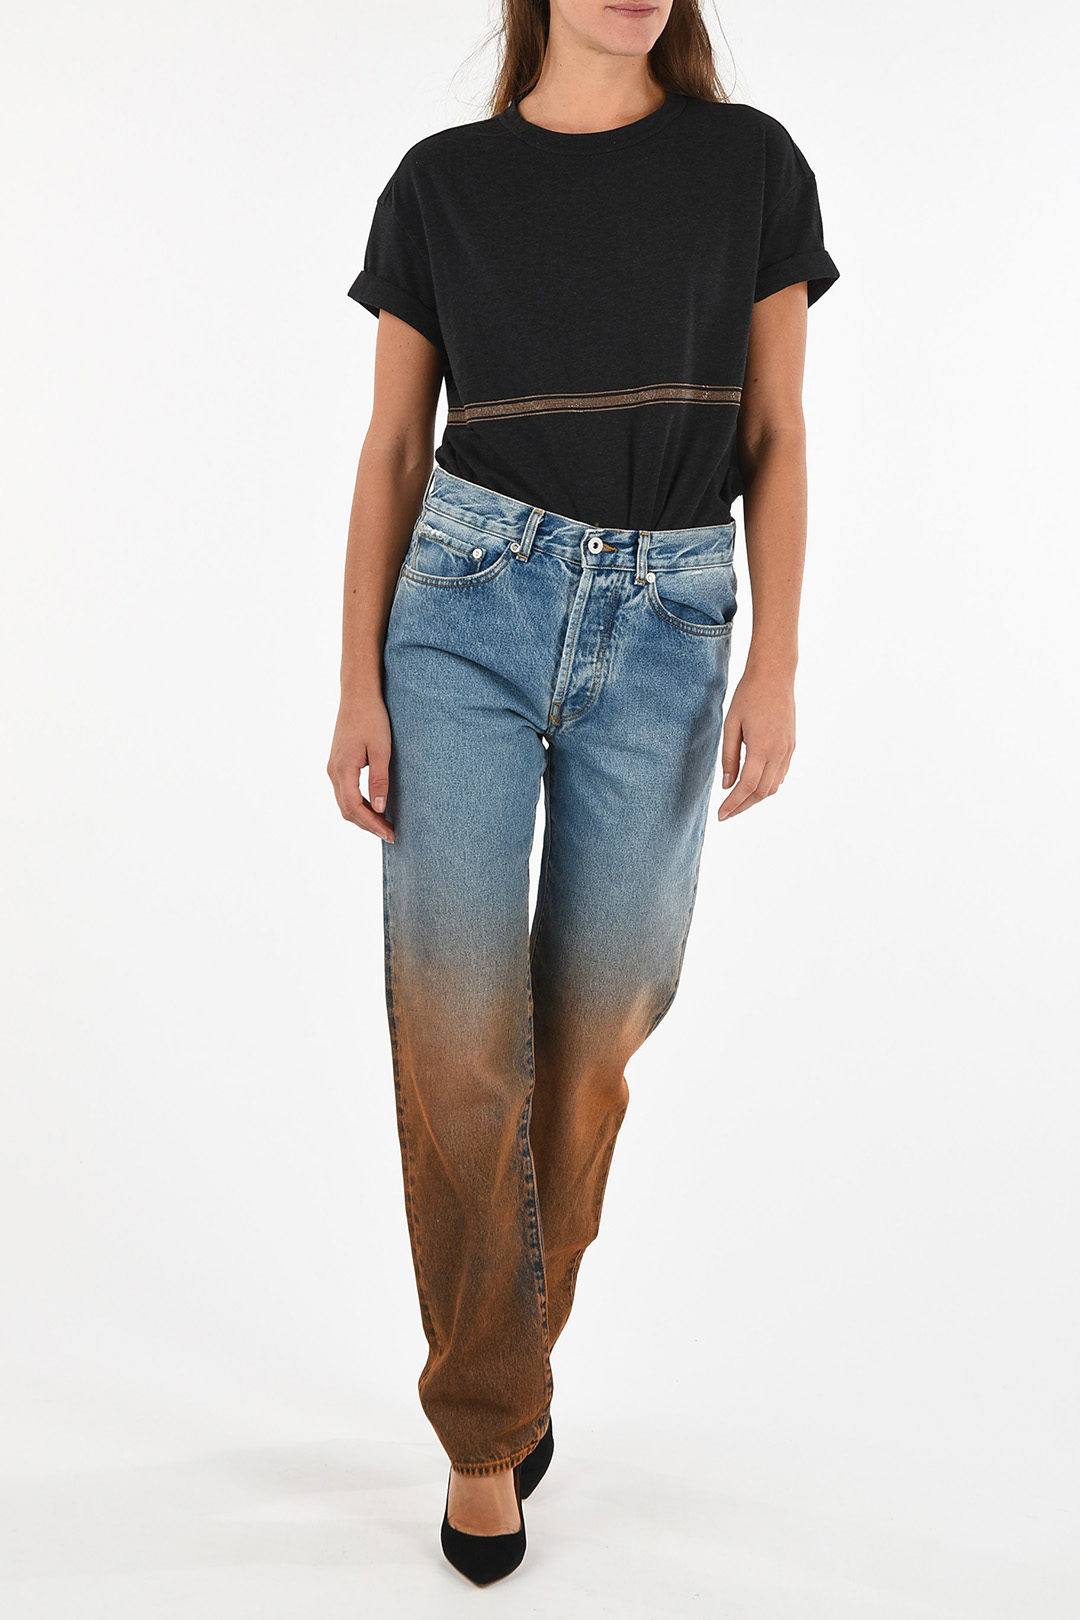 Off-White Waist Jeans With Faded Effect women - Glamood Outlet